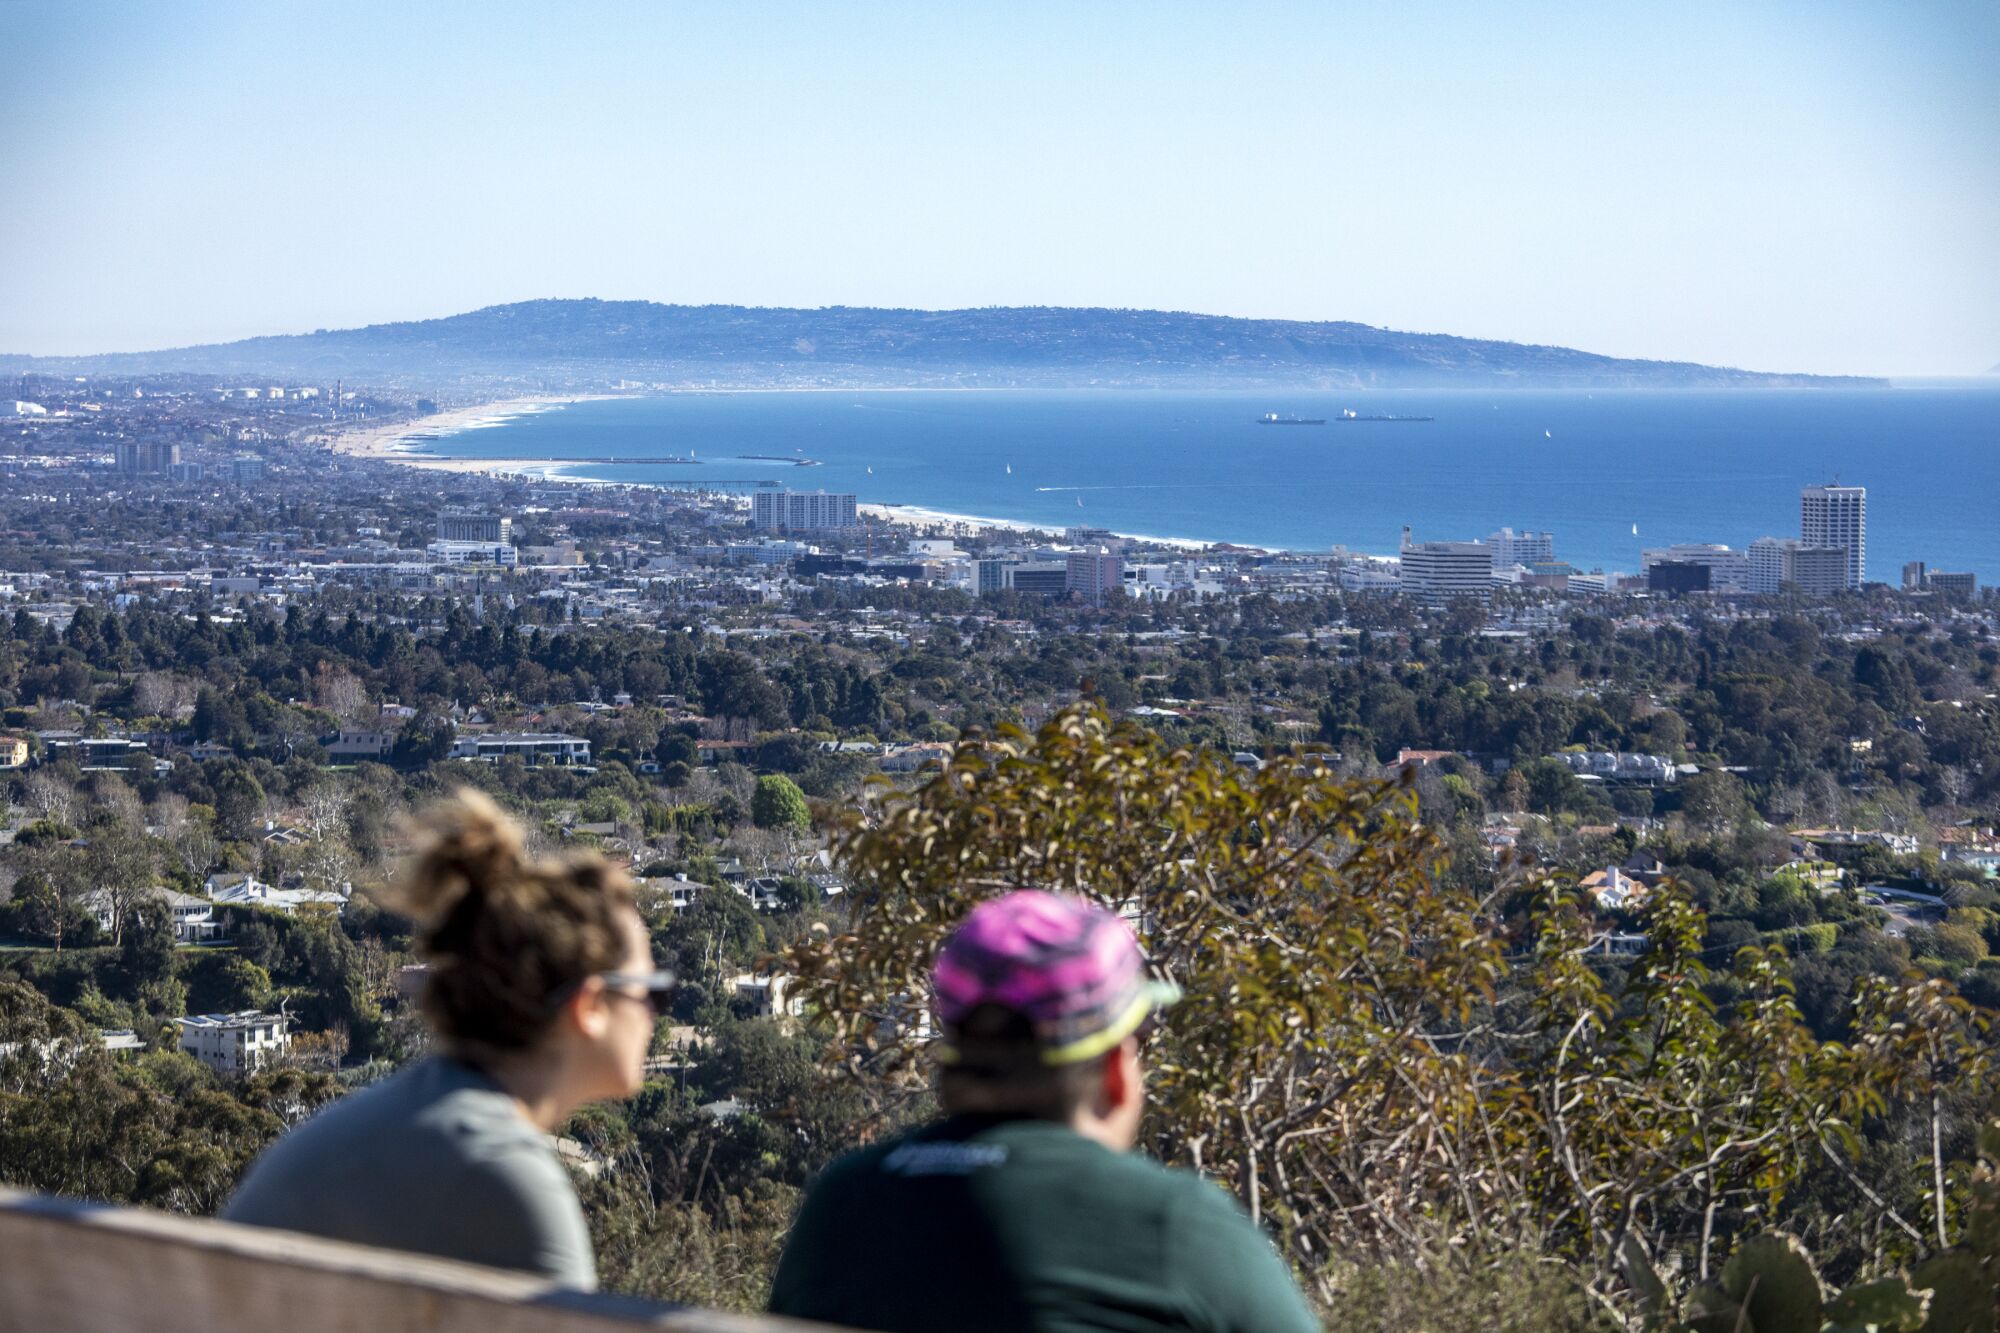 Hikers take in the view of Santa Monica Bay from Inspiration Point in Will Rogers State Park State Historic Park.